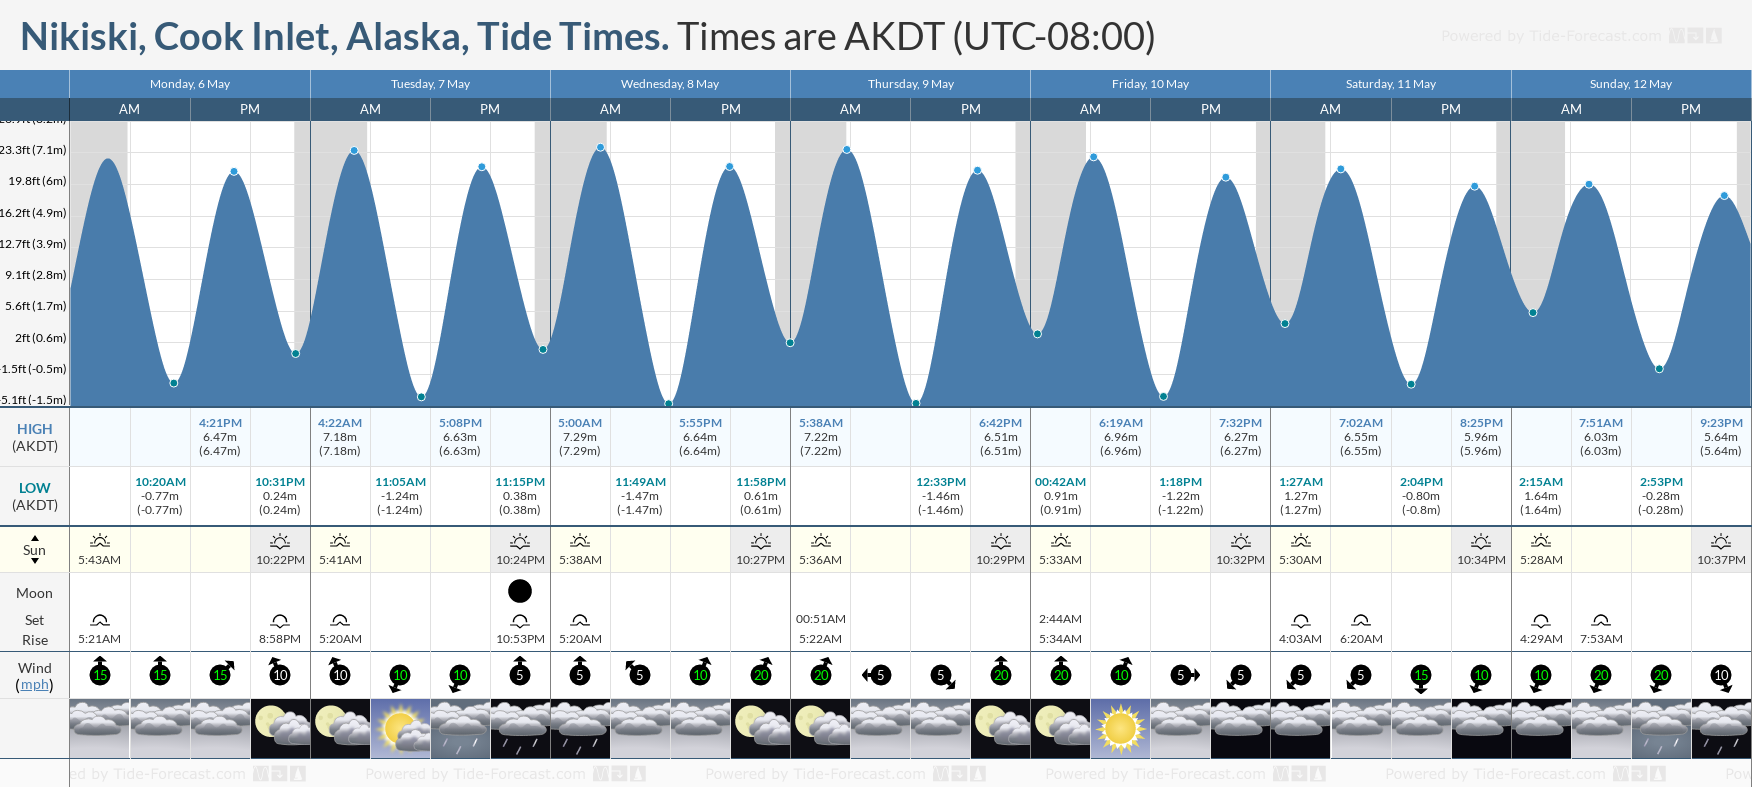 Nikiski, Cook Inlet, Alaska Tide Chart including high and low tide tide times for the next 7 days